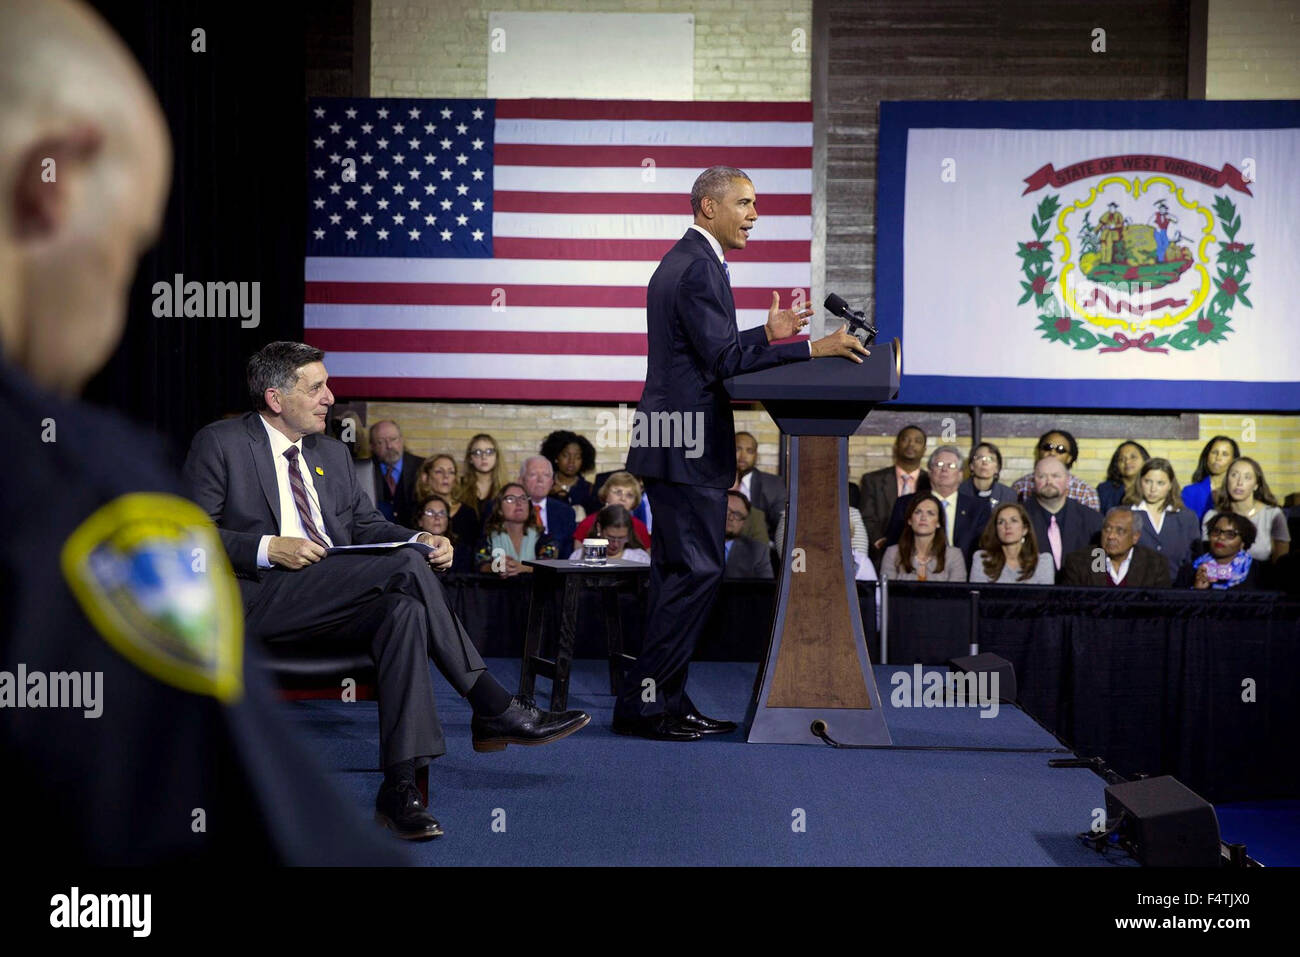 Charleston, West Virginia, USA. 22nd Oct, 2015. U.S. President Barack Obama gives remarks during a community forum on the prescription drug abuse and heroin epidemic at the East End Family Resource Center October 21, 2015 in Charleston, West Virginia. With the President on stage is Dr. Michael Botticelli, left, Director of the Office of National Drug Control Policy. Stock Photo